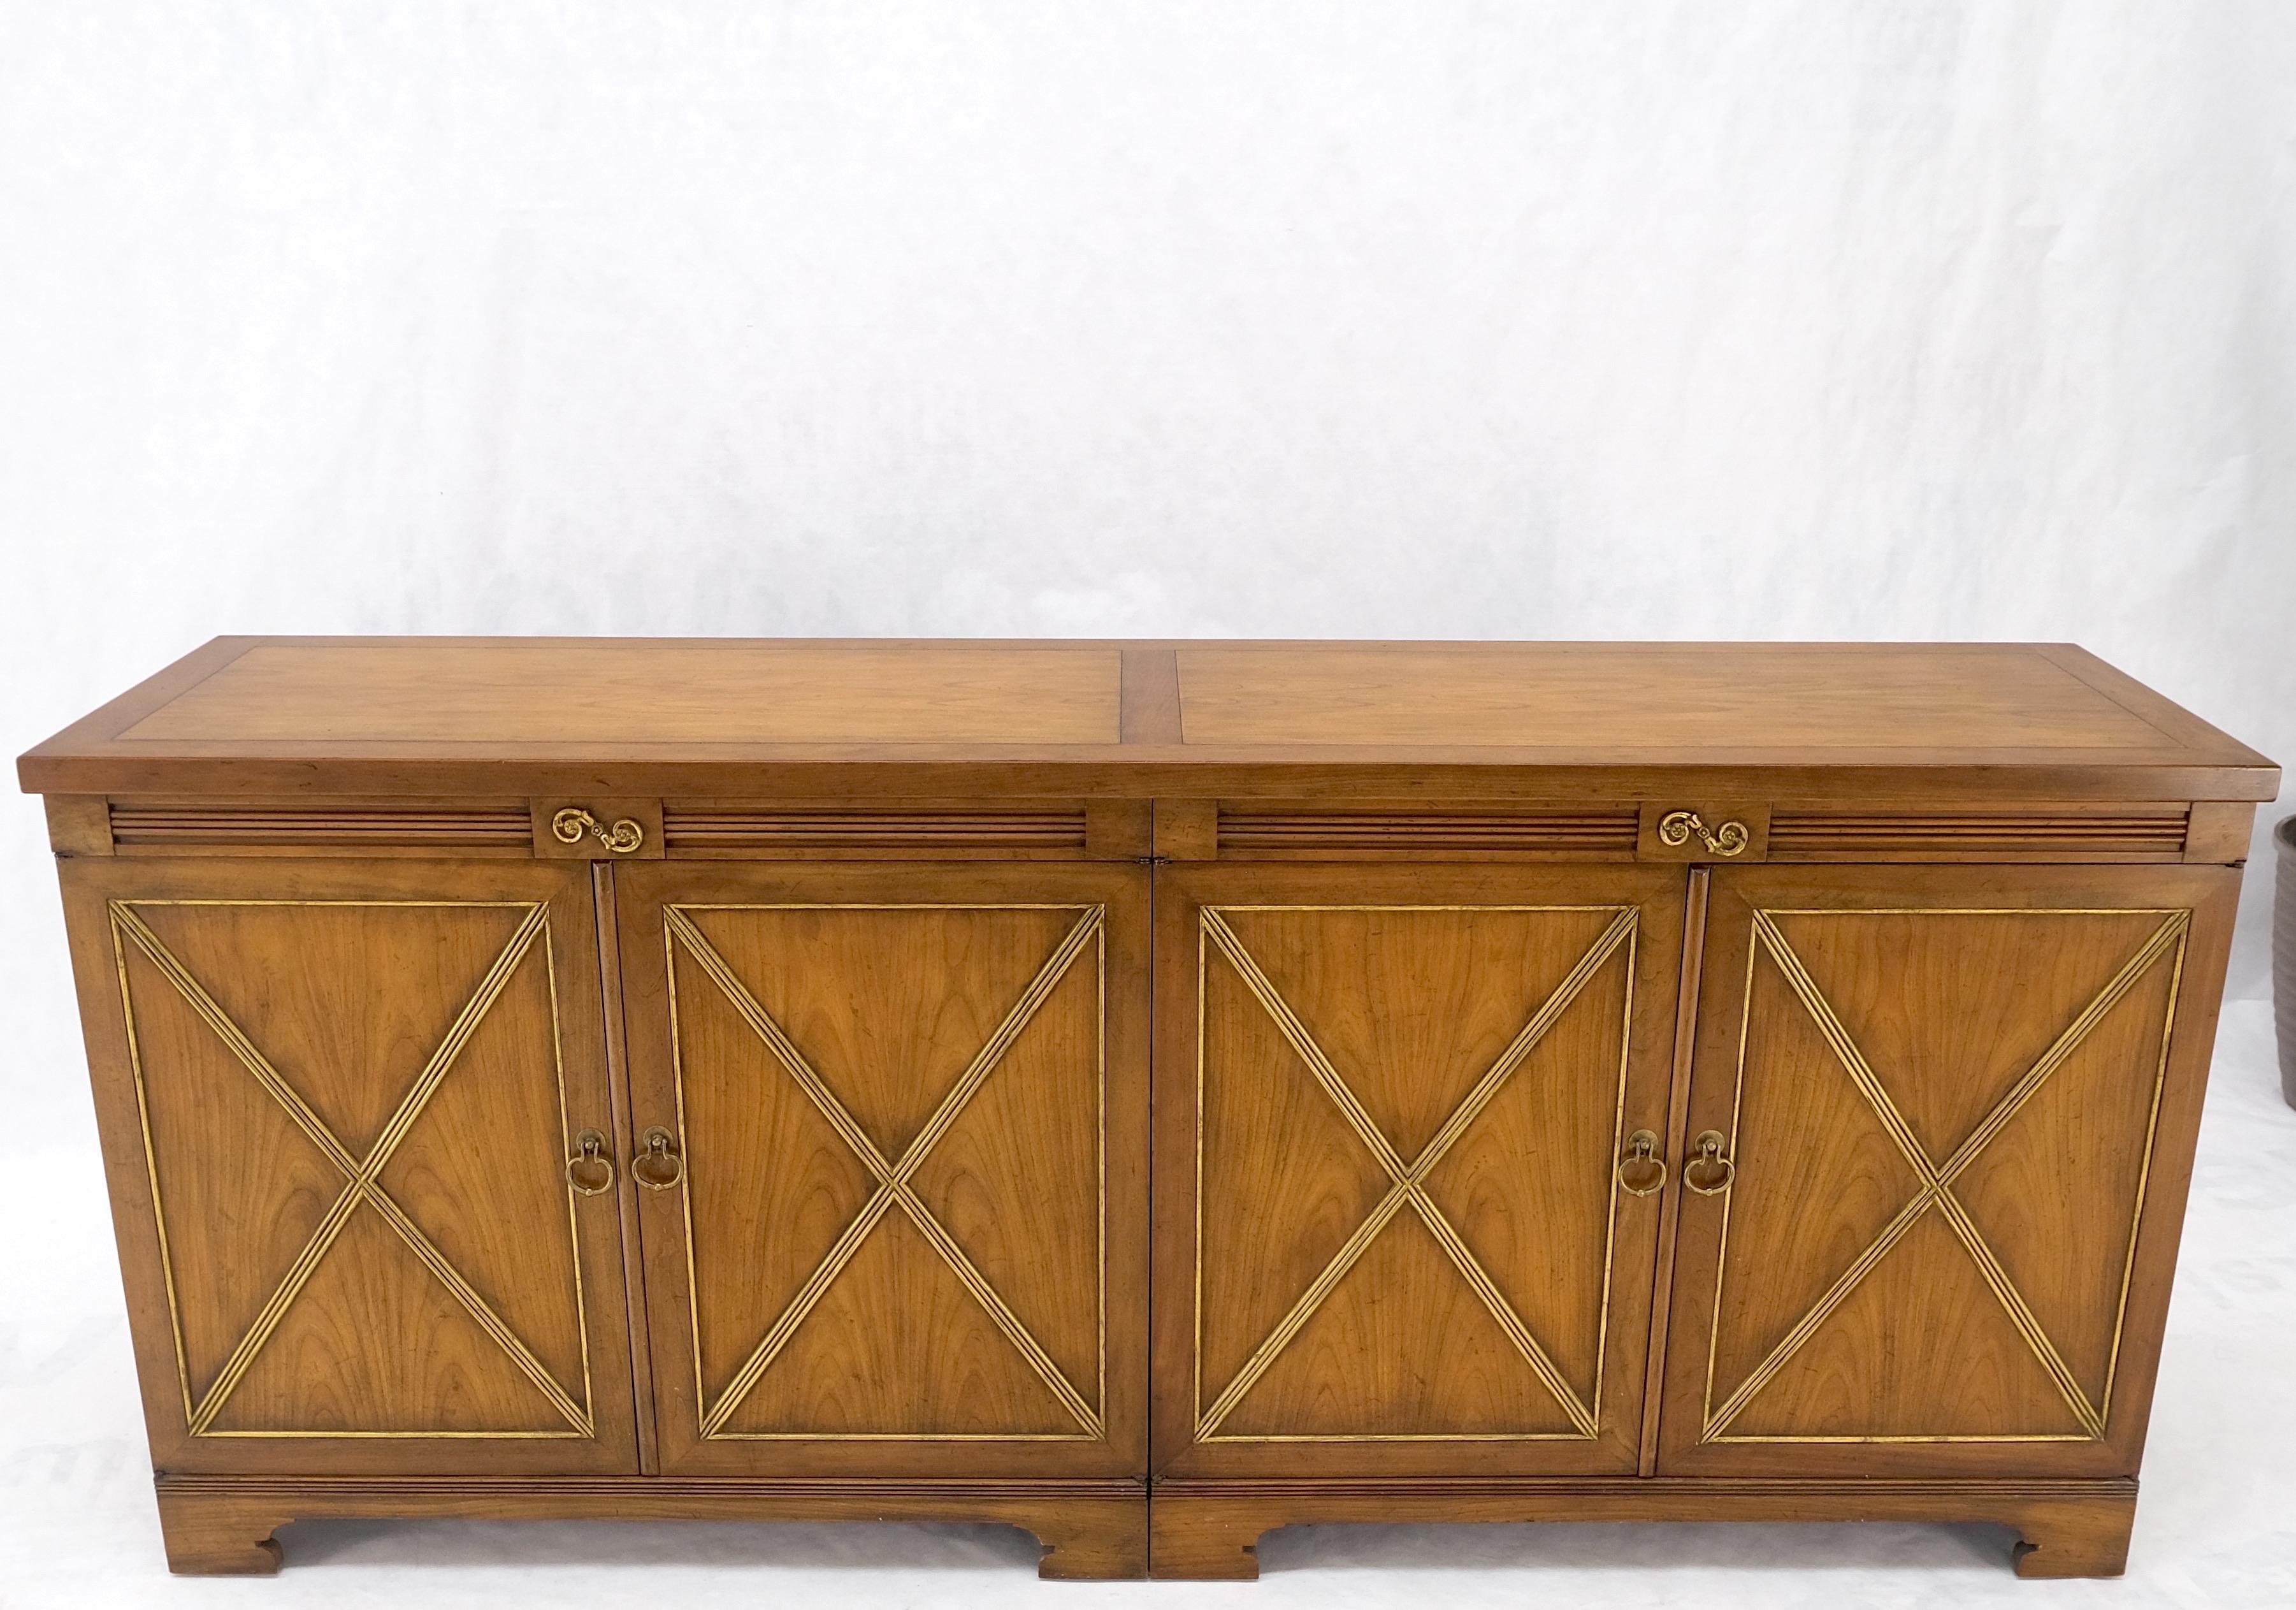 Baker Double Doors Compartments Long Credenza Sideboard Buffet Cabinet MINT! For Sale 6